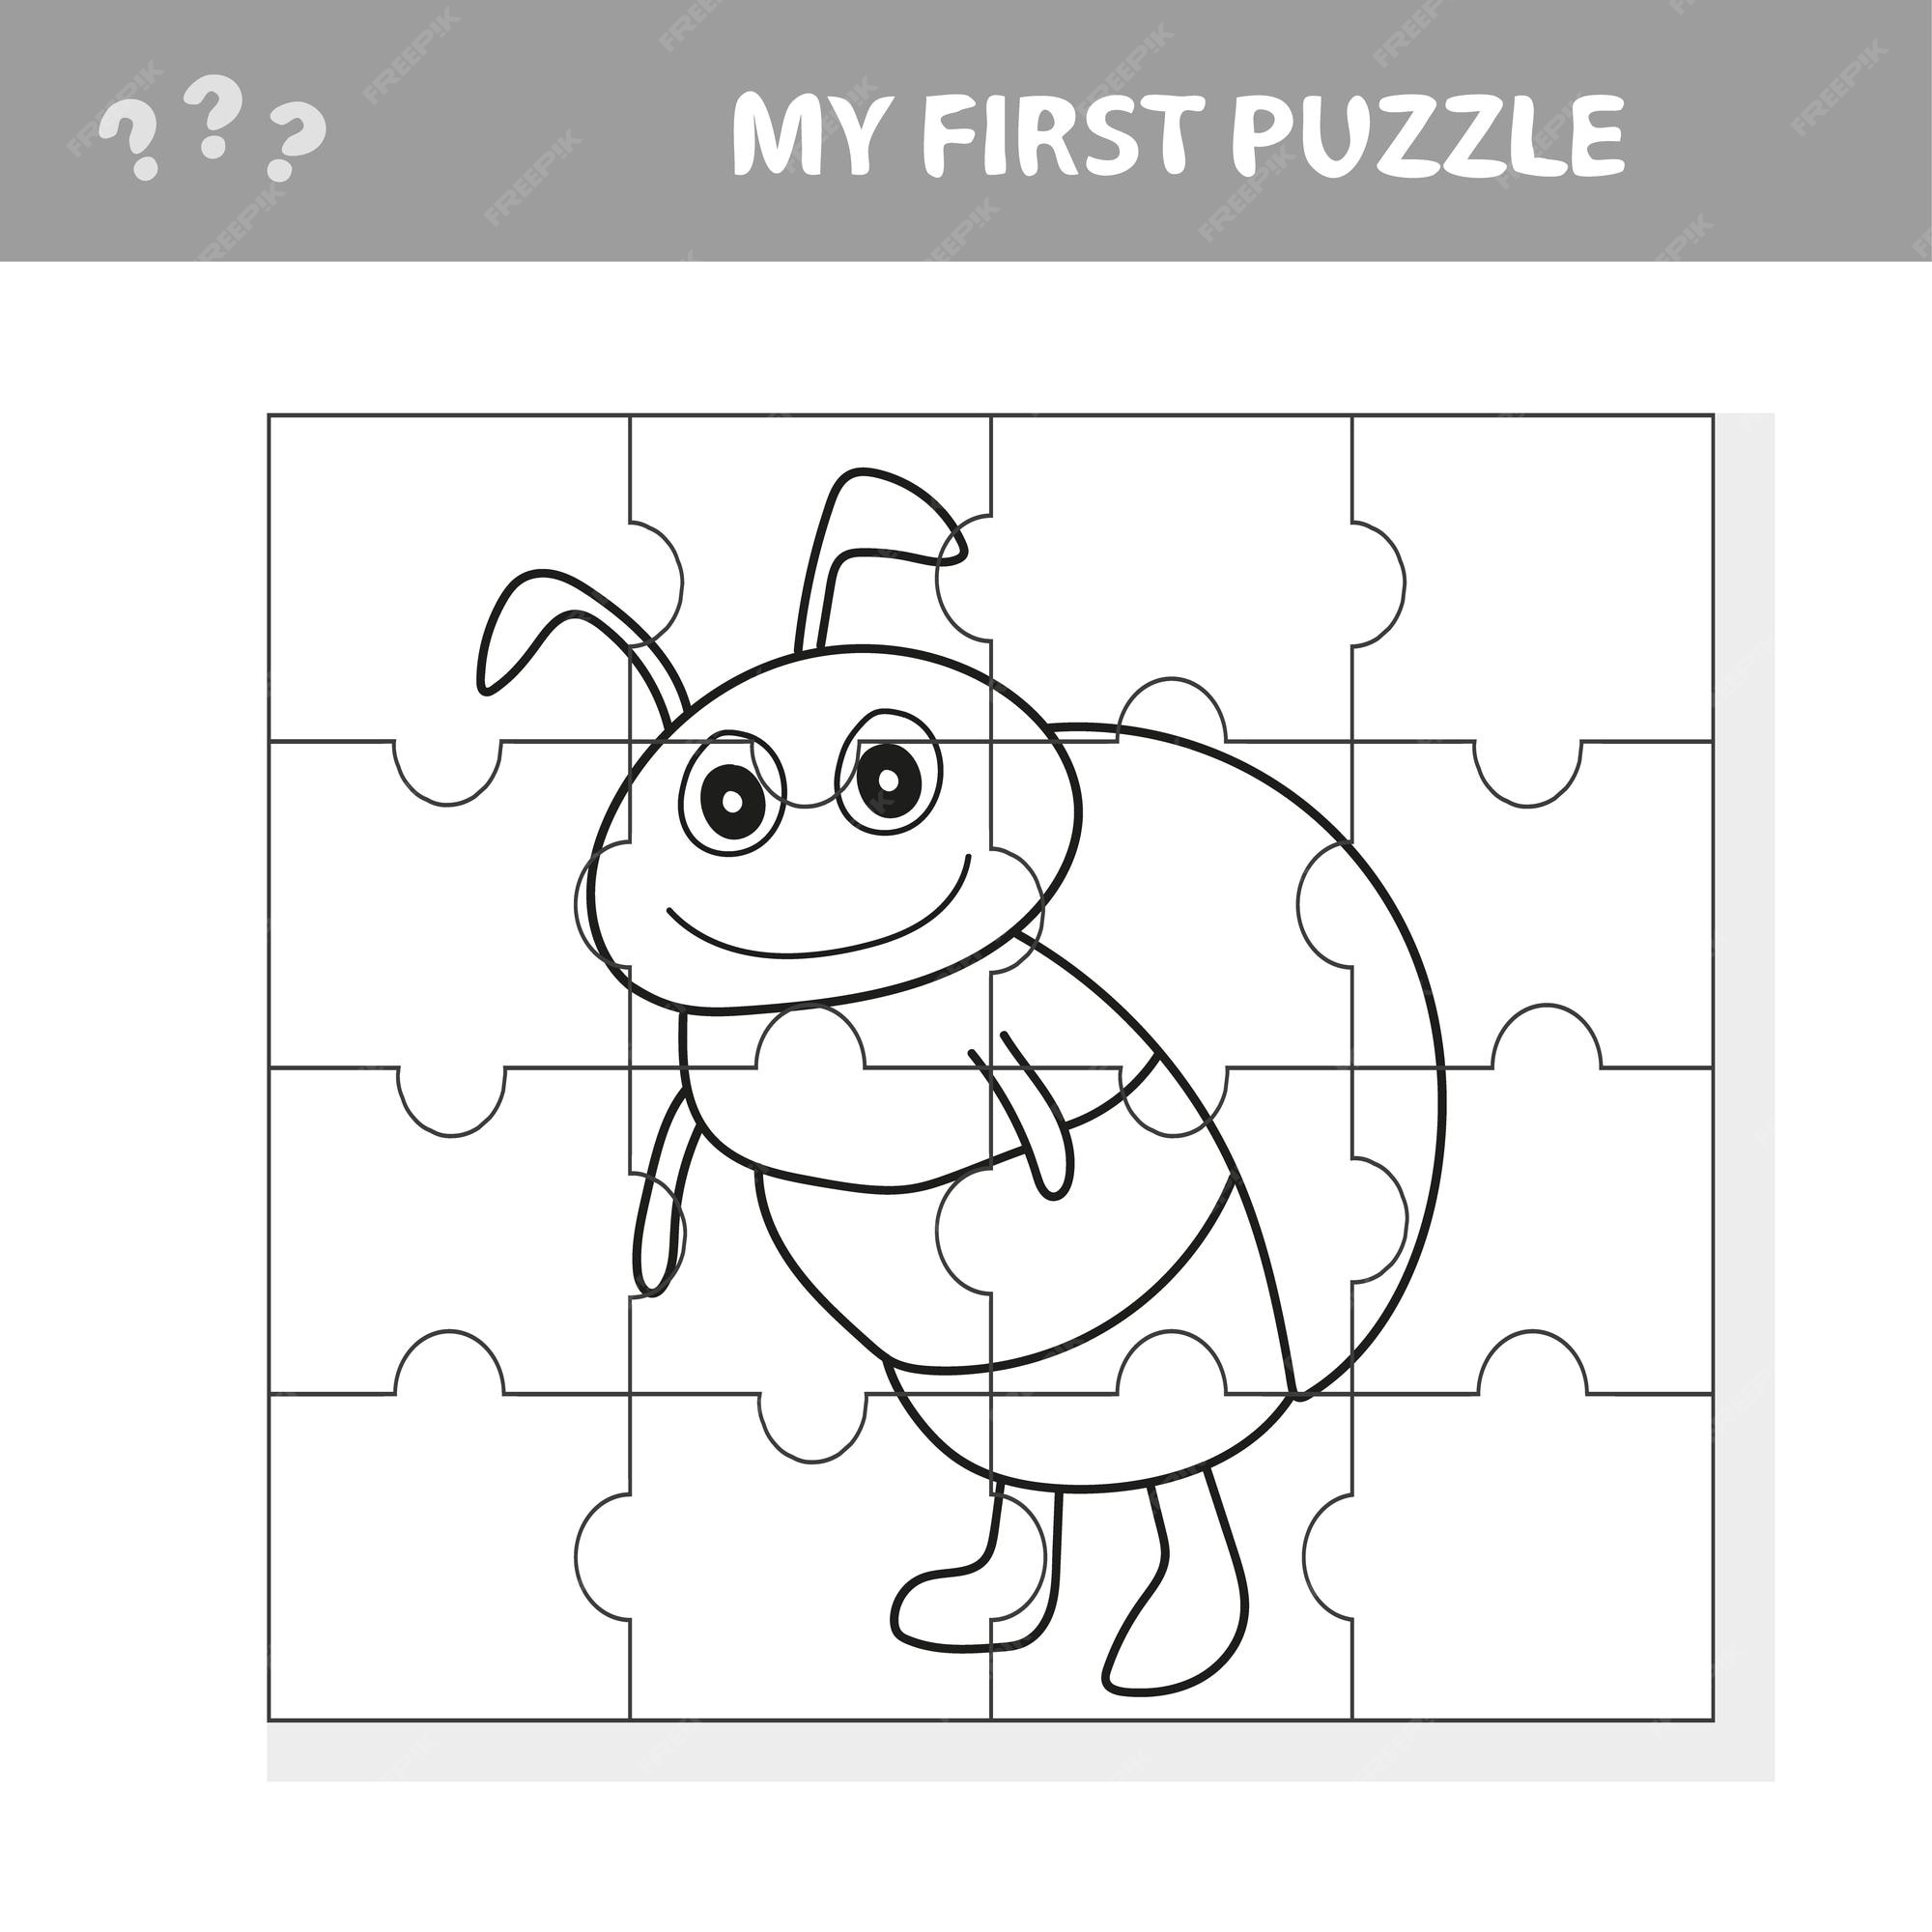 Premium vector cartoon illustration of education jigsaw puzzle game for preschool children with funny beetle character